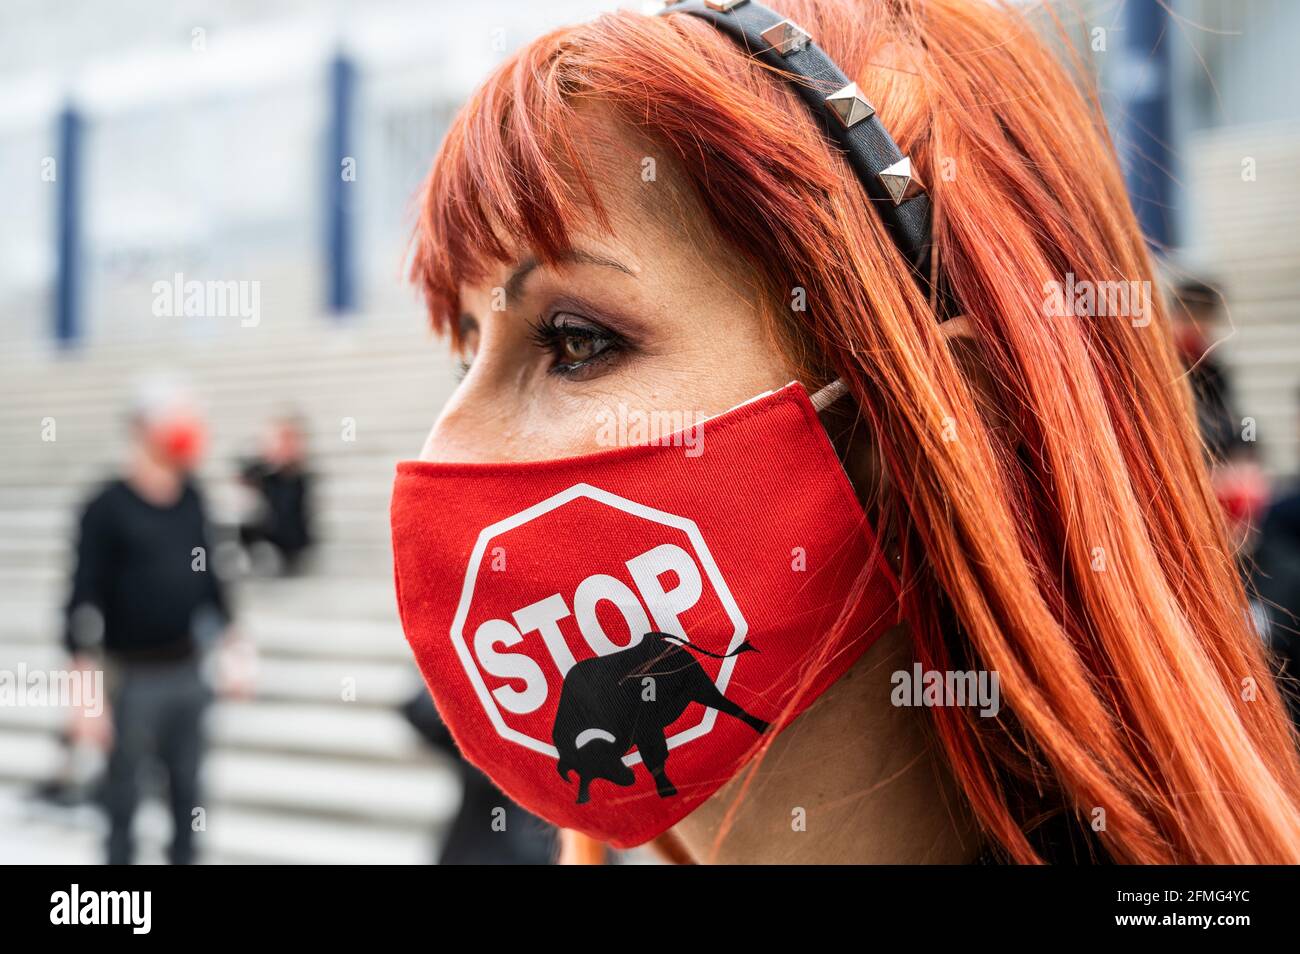 Madrid, Spain. 09th May, 2021. An animal rights activist wearing a face mask during a protest against bullfighting as the bullfighting season starts in Madrid next week for San Isidro festivity. Animal rights group Anima Naturalis gathered to protest in Vista Alegre bullring of Madrid demanding the abolition of bullfighting, shouting slogans against animal cruelty and animal torture. The Bullfighting season will start next week with a maximum capacity of 40% and a maximum of 6,000 spectators due to healthcare measures to stop the spread of coronavirus. Credit: Marcos del Mazo/Alamy Live News Stock Photo